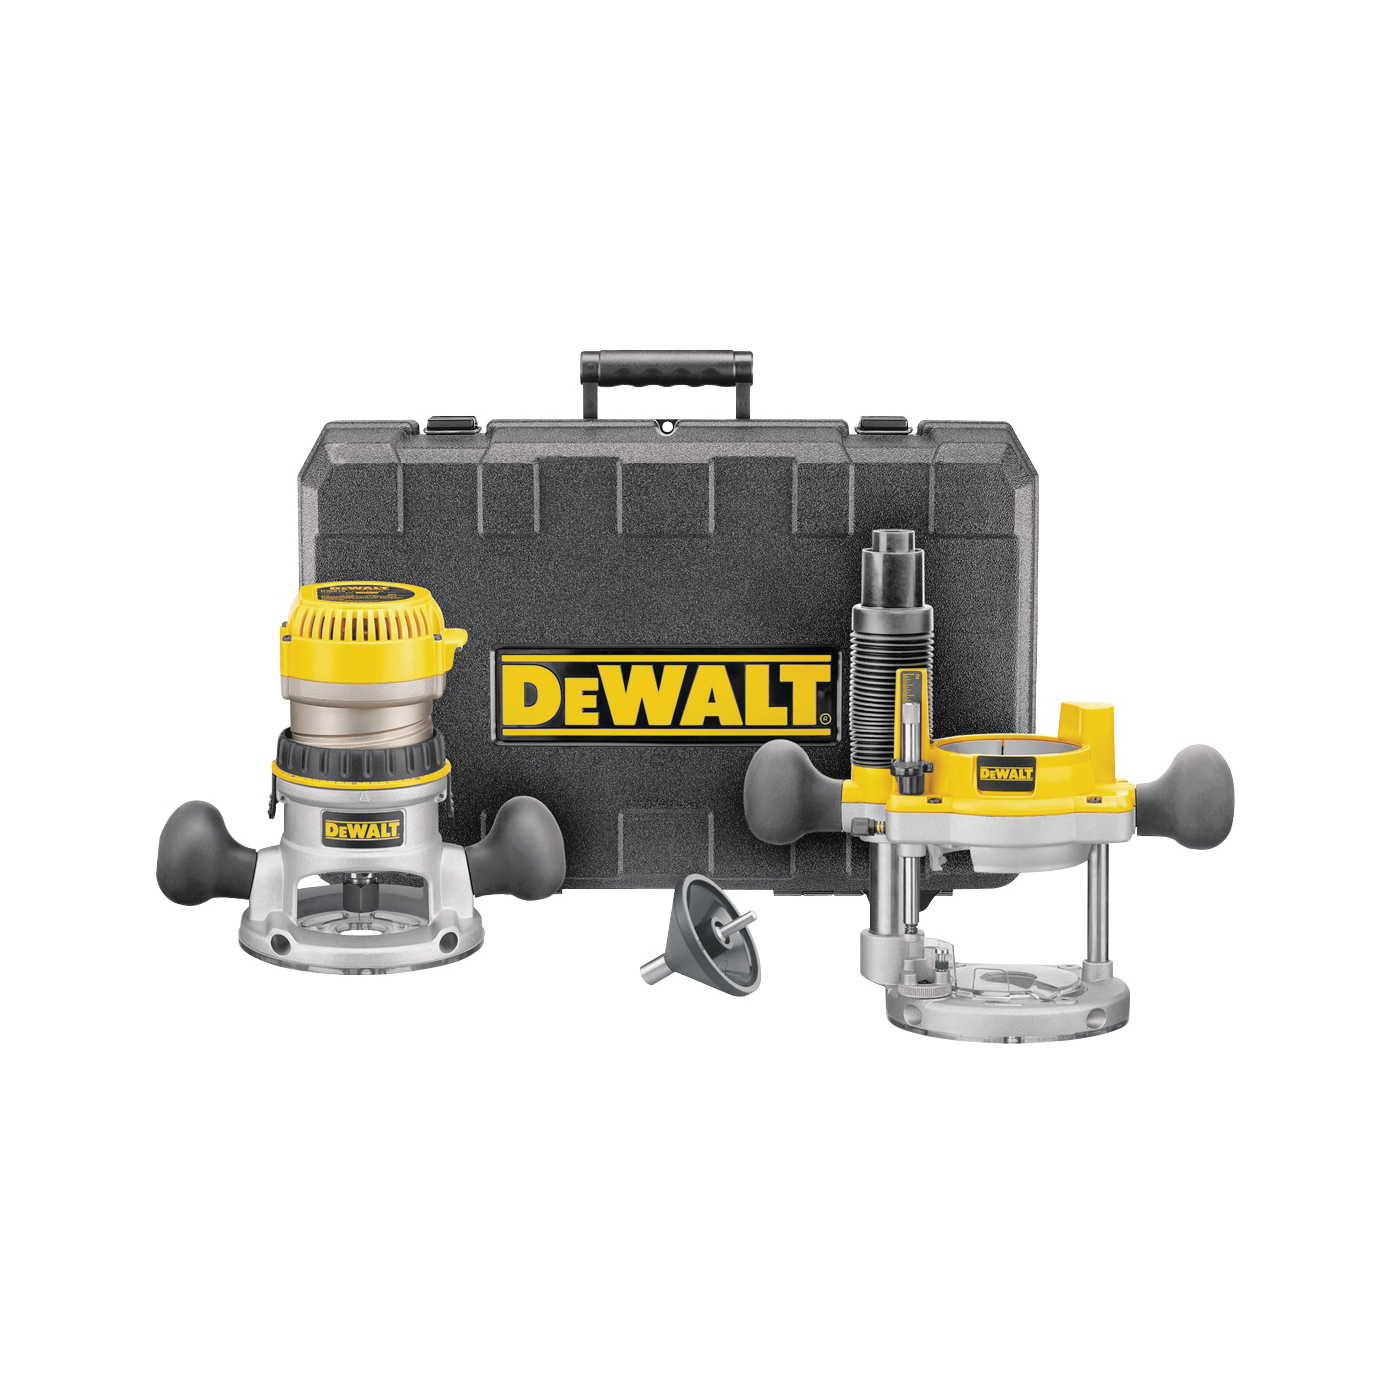 DW616PK Router Combination Kit, 11 A, 24,500 rpm Load Speed, 2-1/2 in Max Stroke